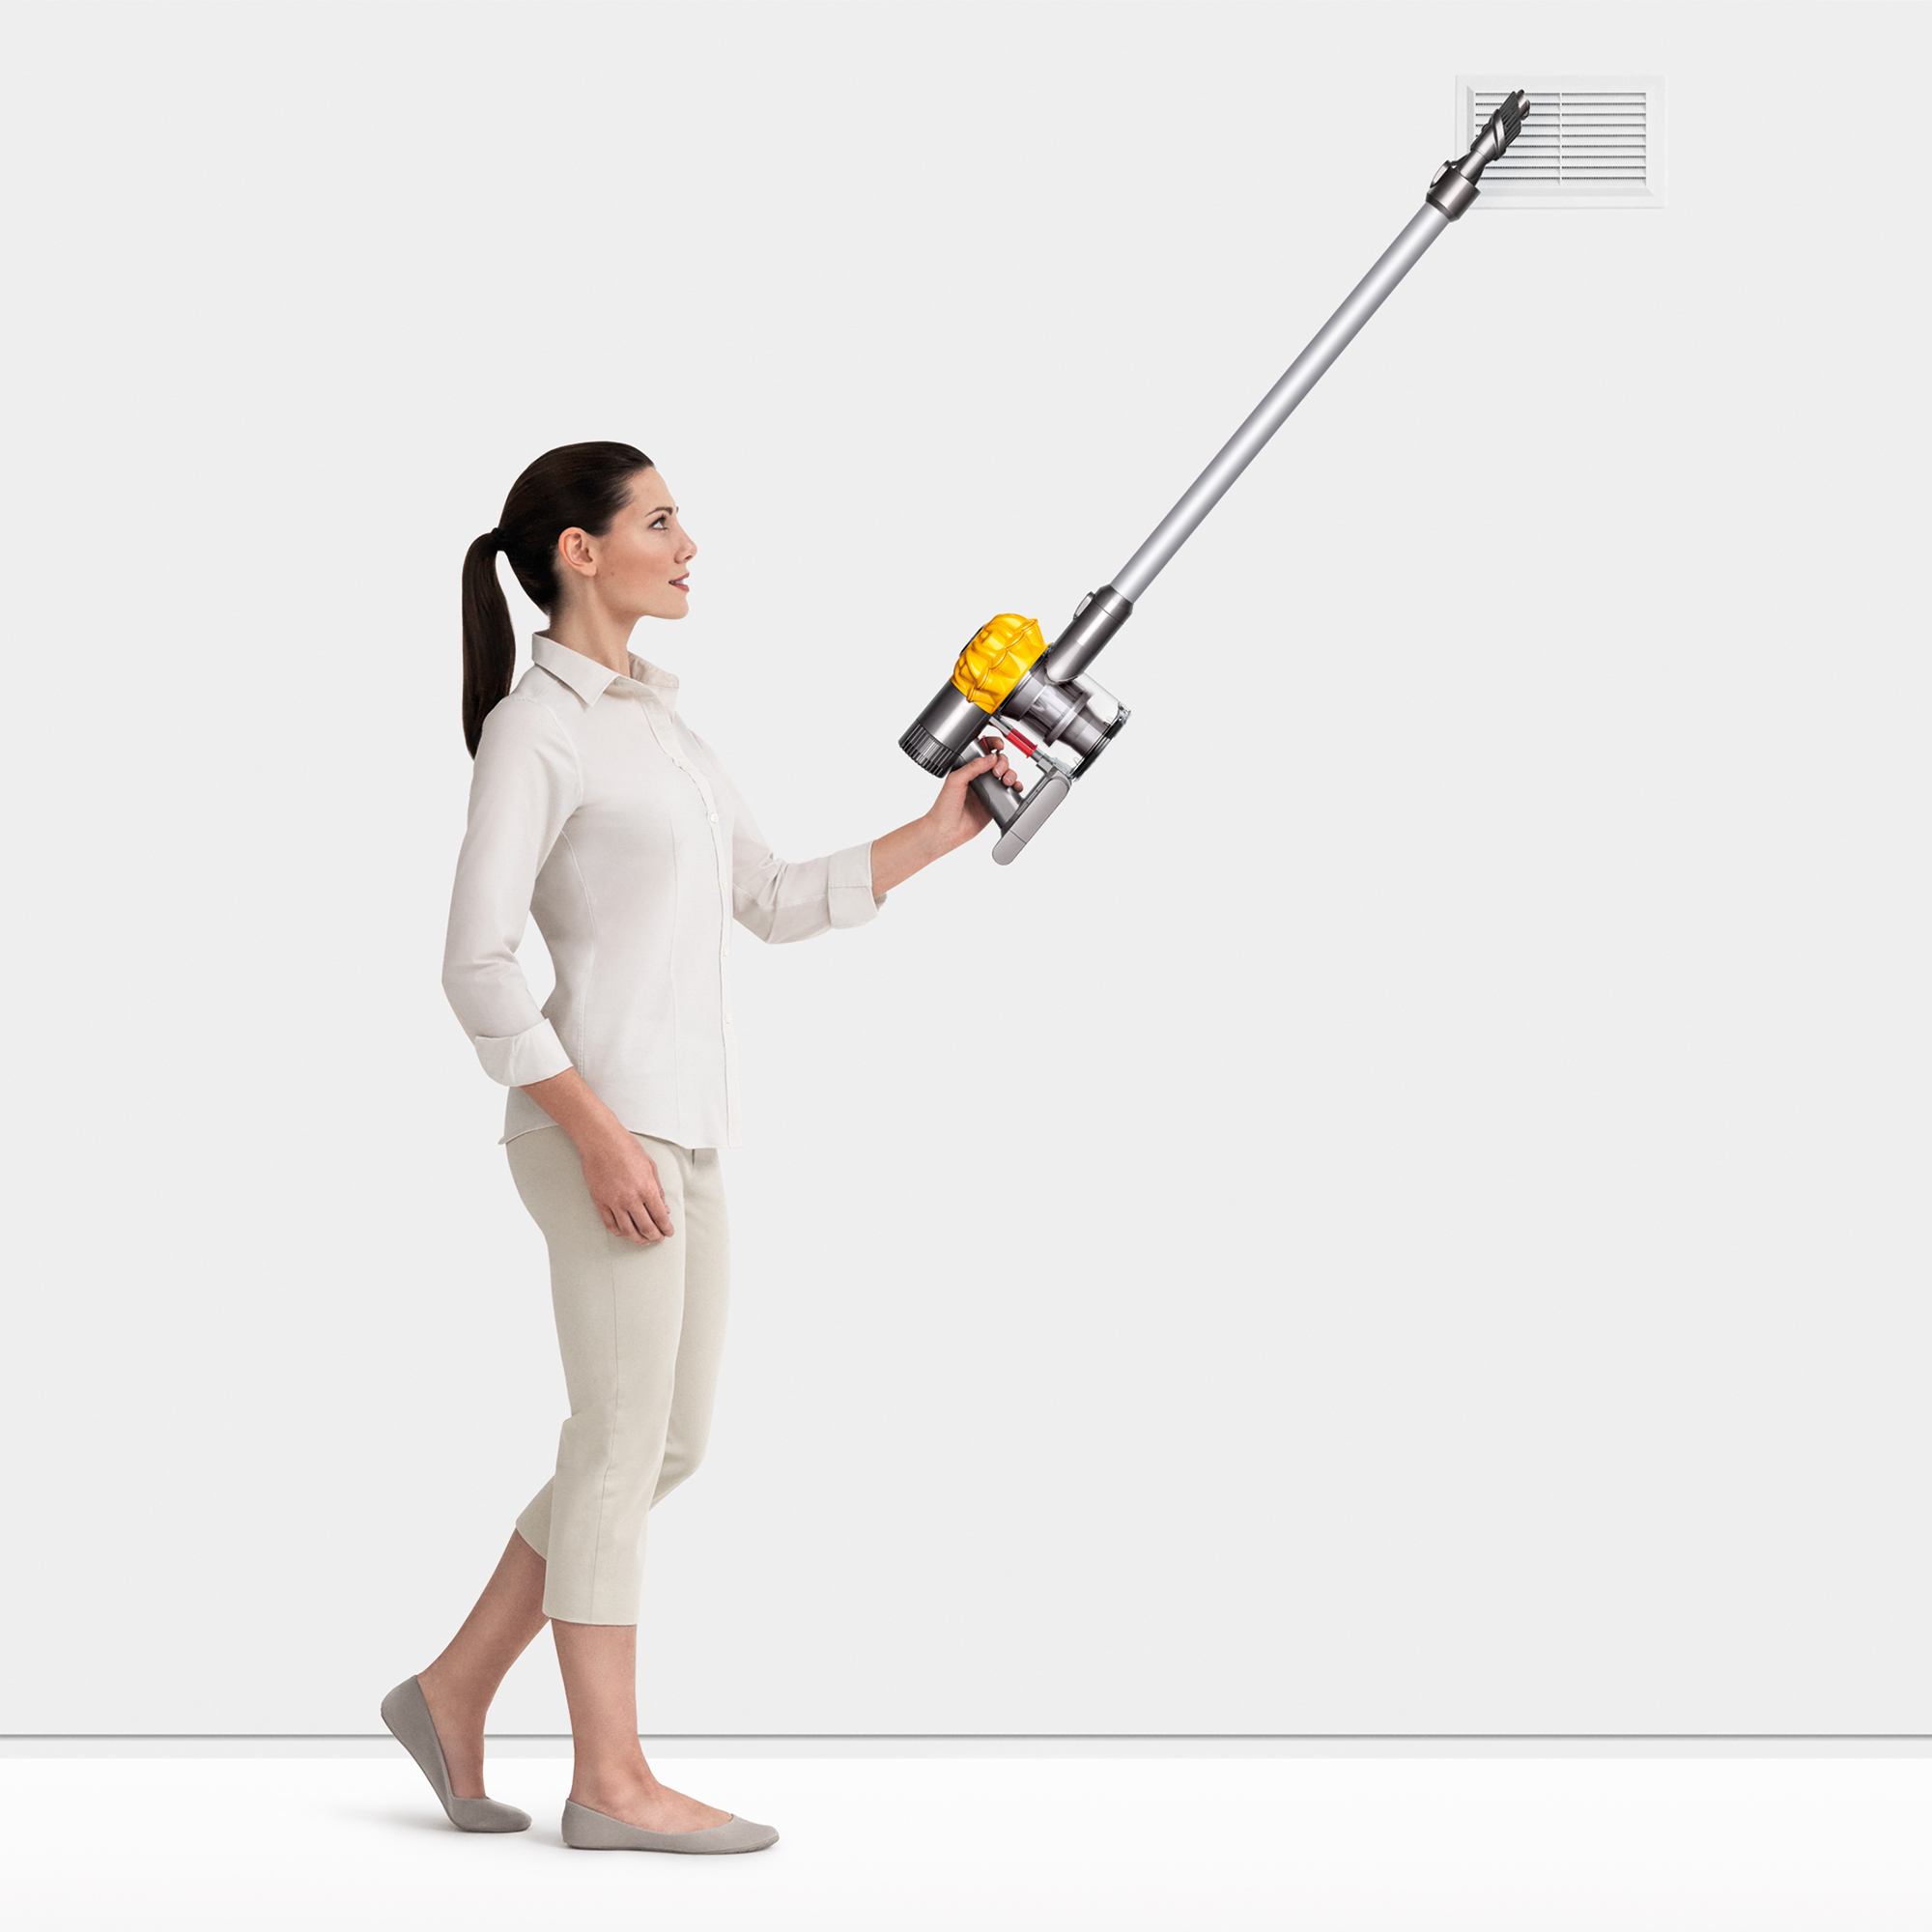 Dyson DC59 Animal Cordless Vacuum Cleaner - image 4 of 4